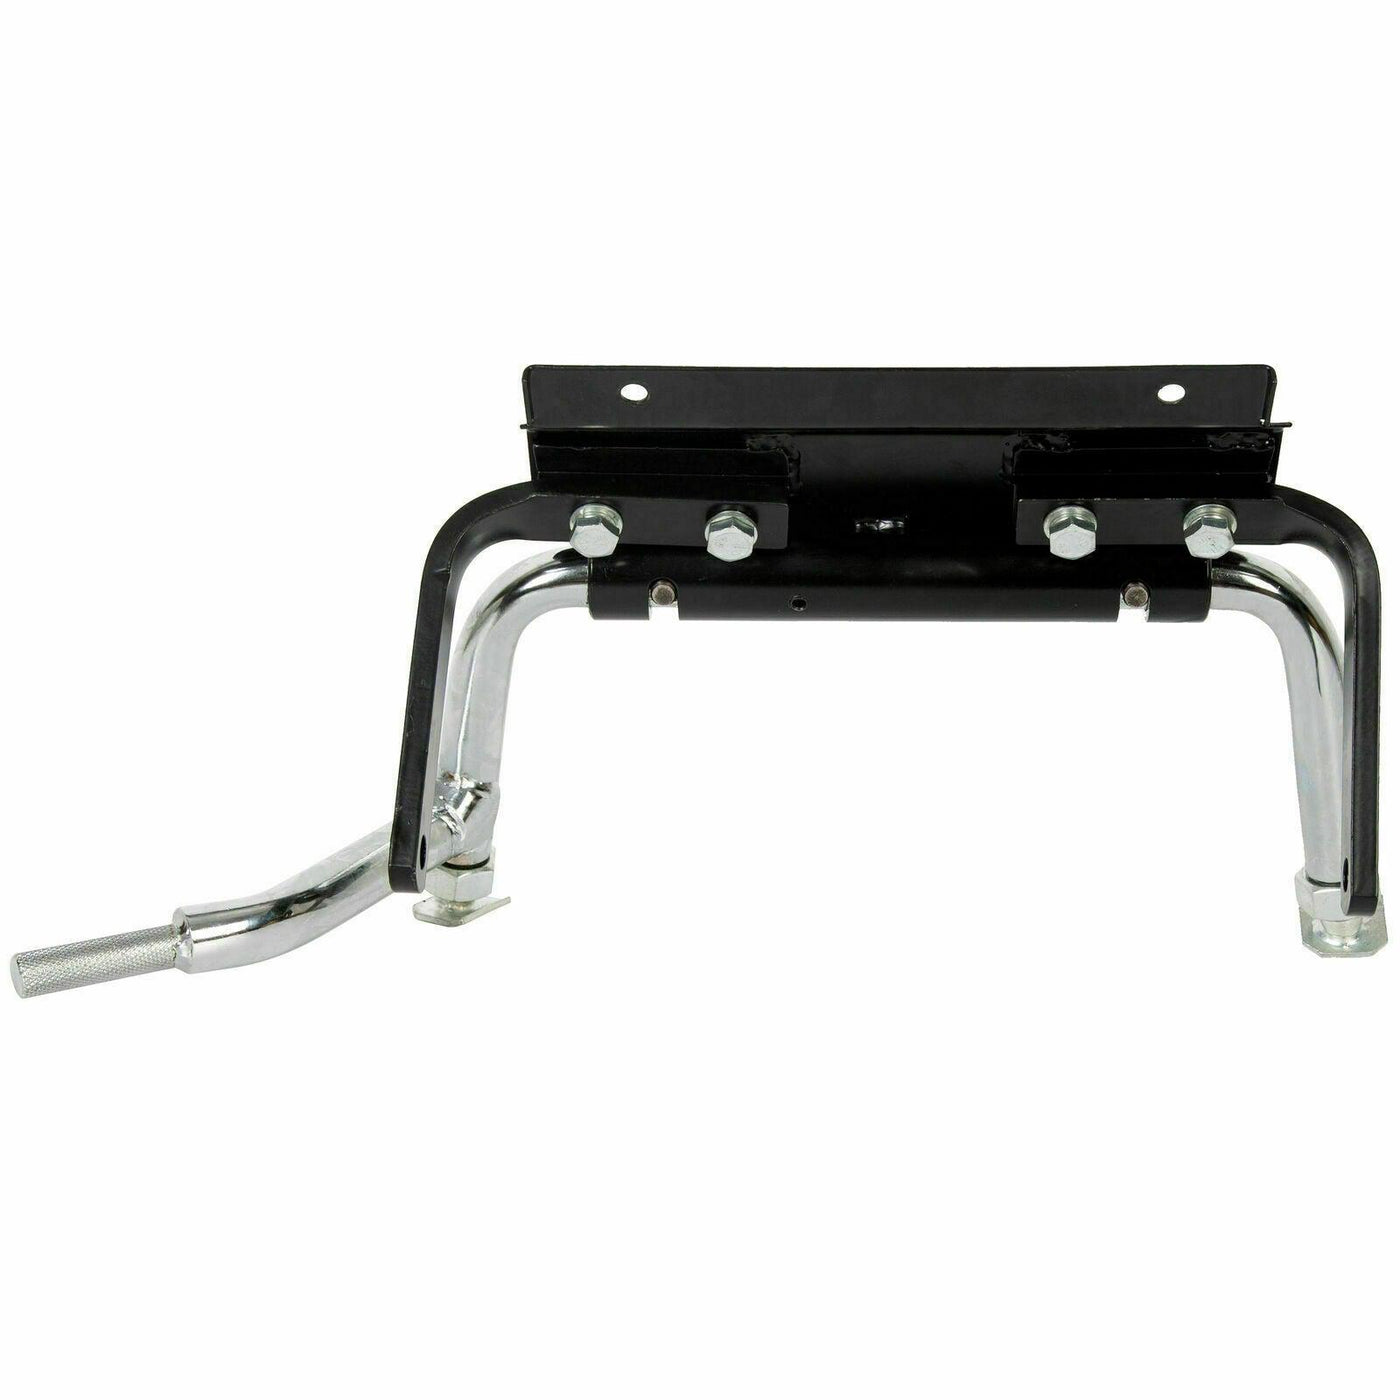 Adjustable Service Center Stand For Harley Davidson 99-08 Touring Road King CVO - Moto Life Products